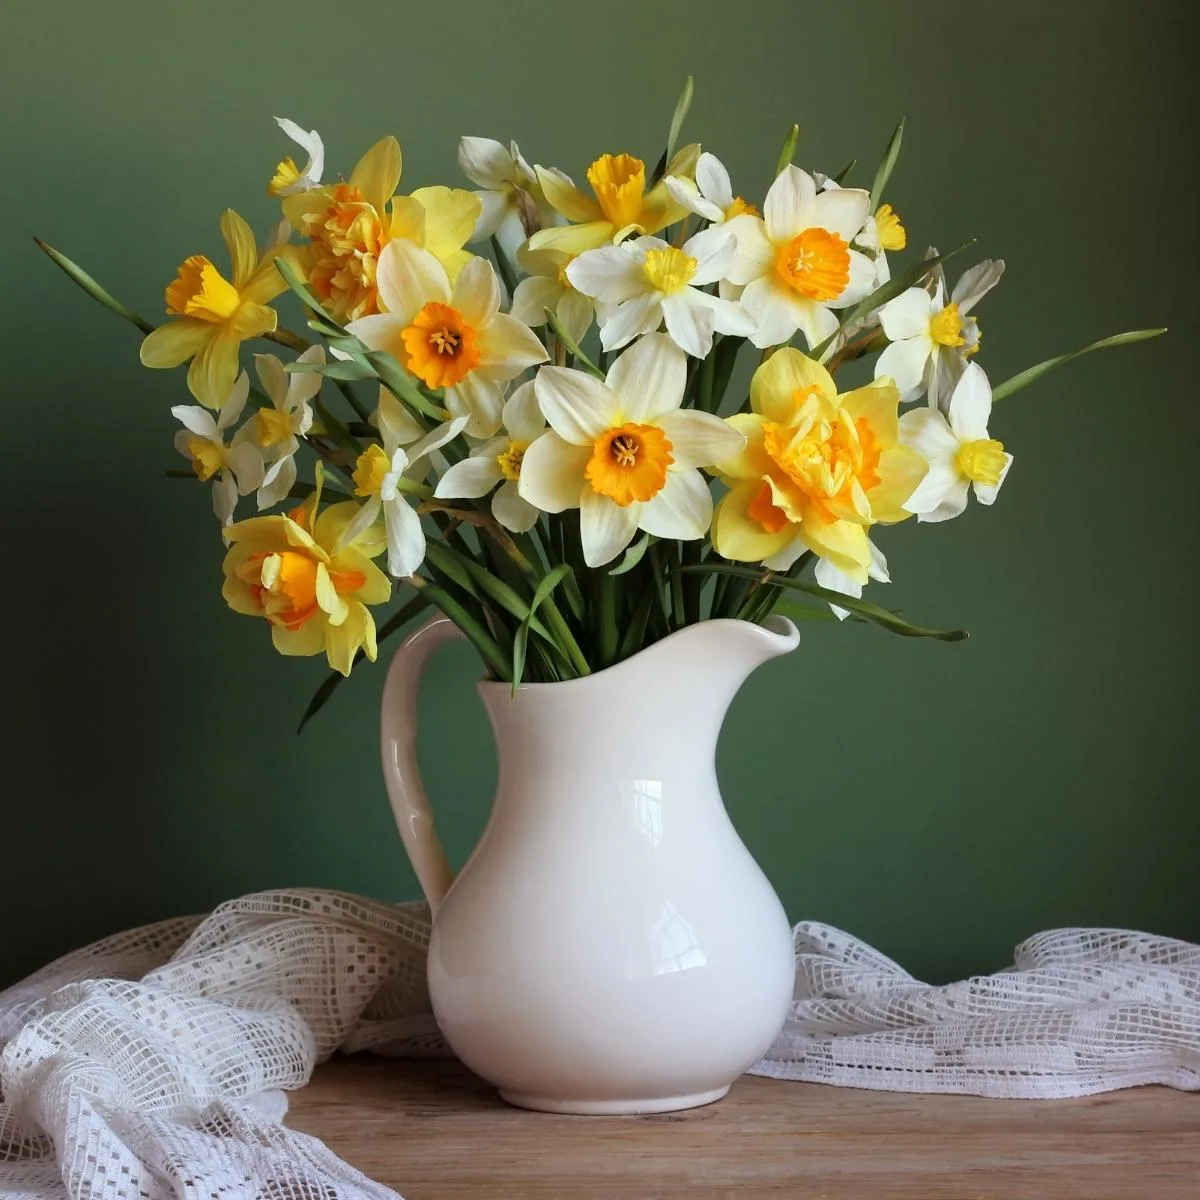 bouquet of daffodils in a white pitcher on a wooden table